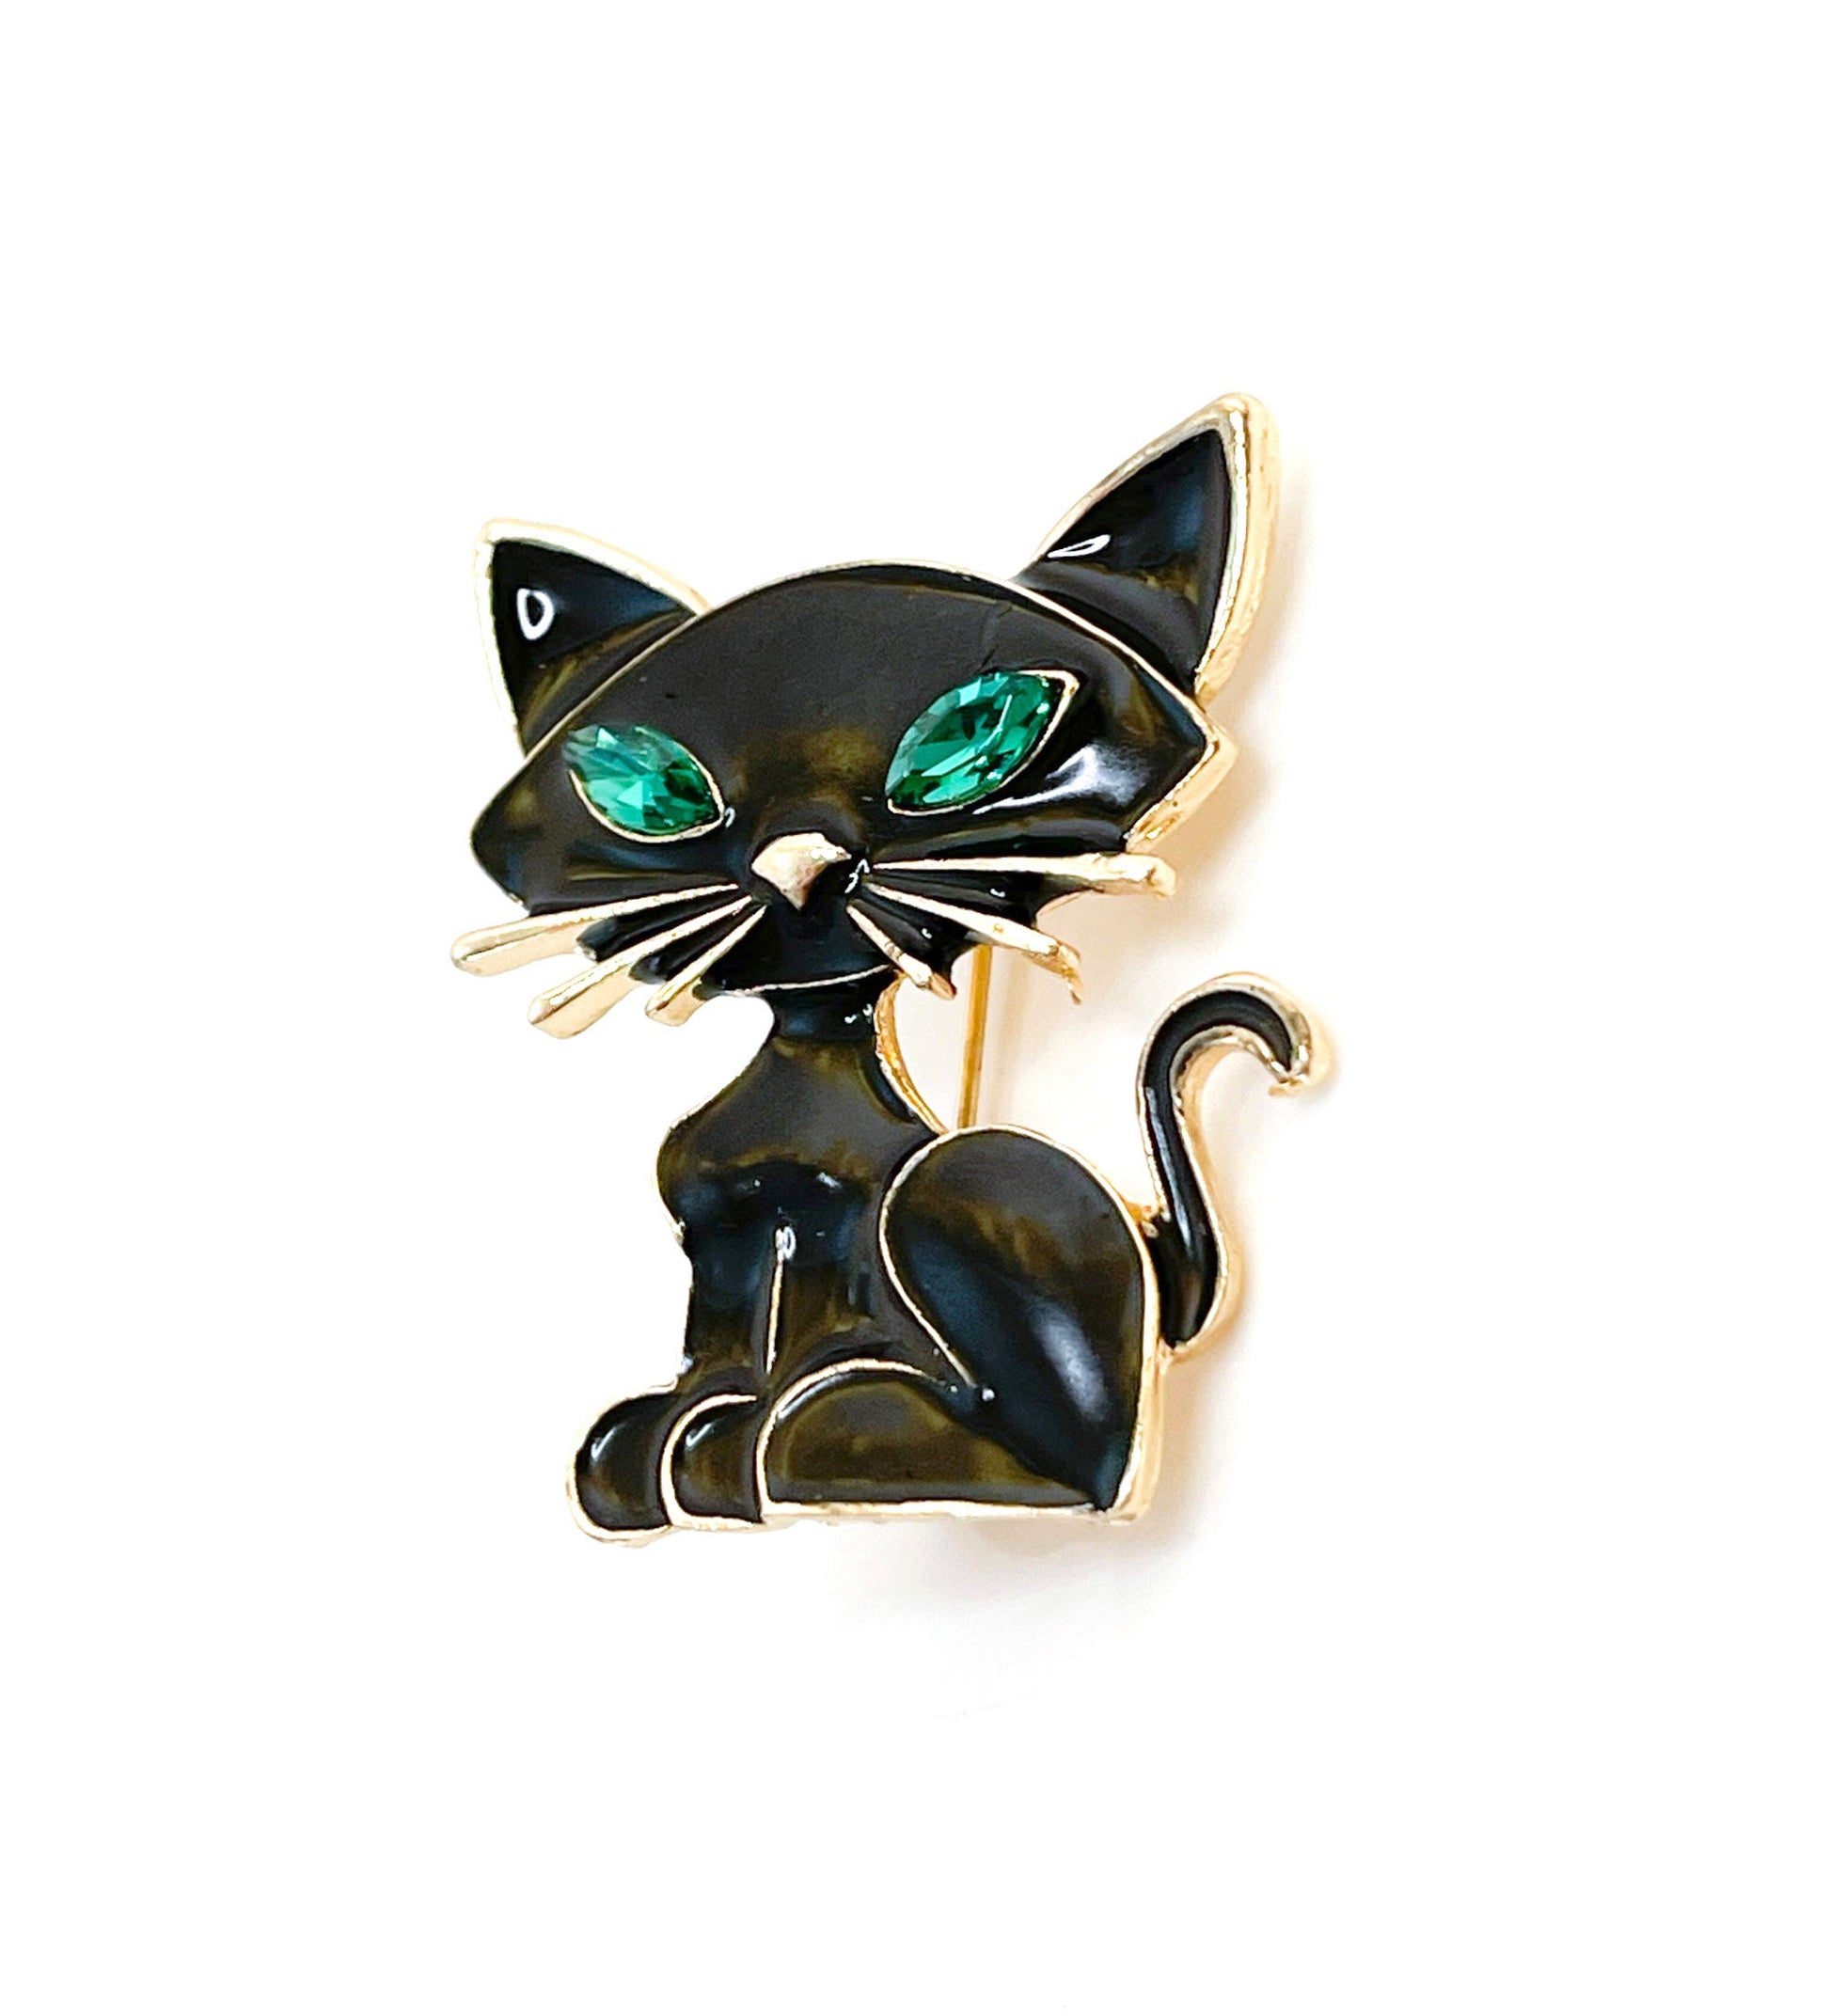 ack Green Eyed Sitting Cat Brooch | Gift for Cat Lovers